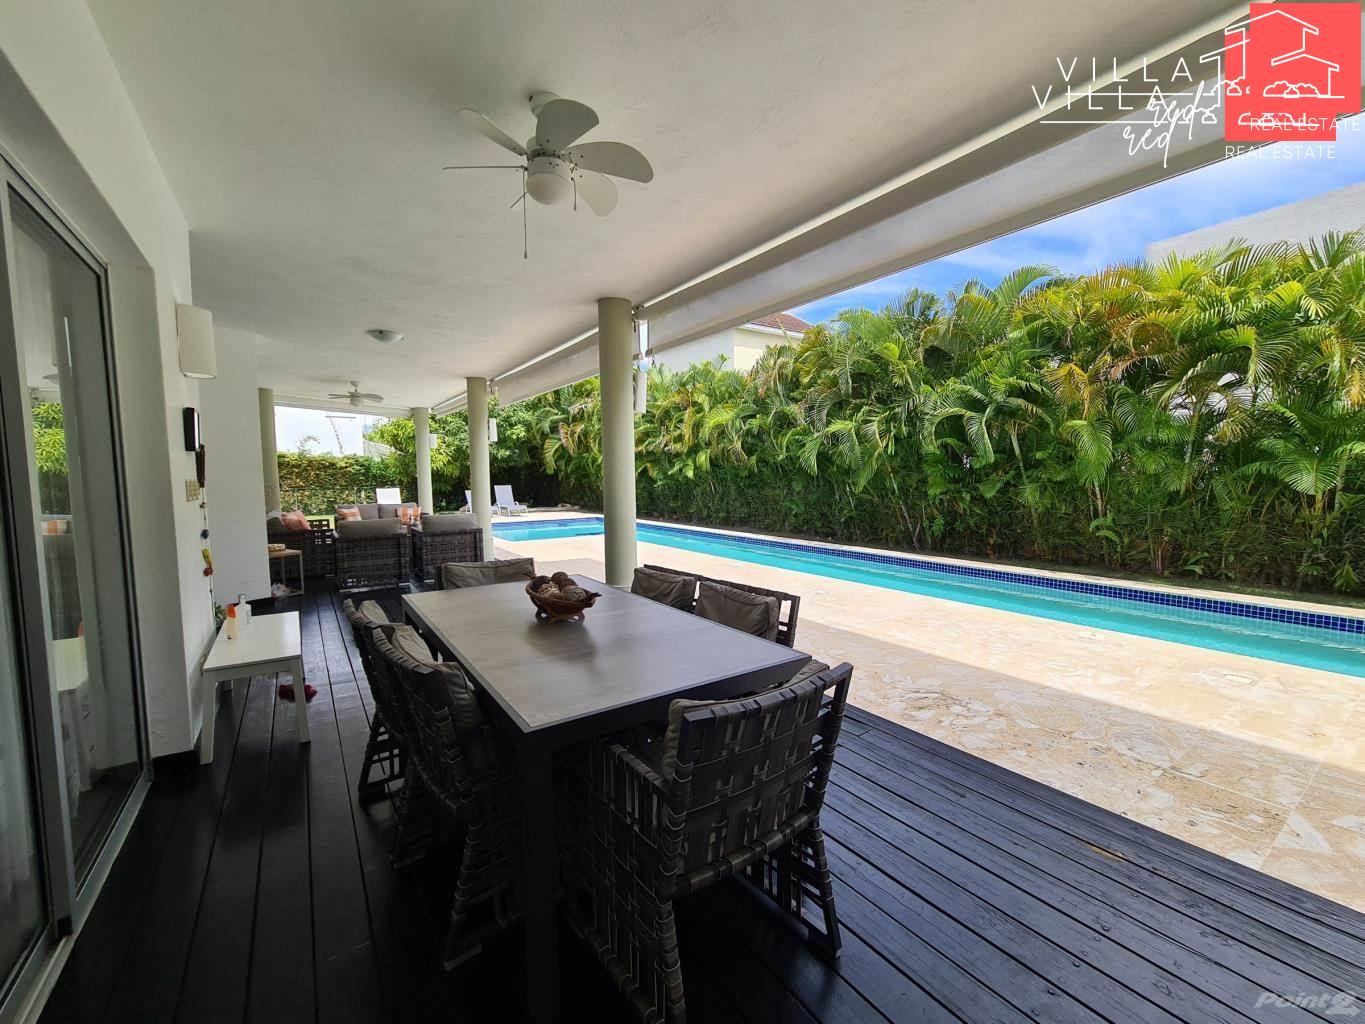 Villa.red Modern Residential House With a Pool In Punta Cana https://villa.red/?post_type=property&p=26193